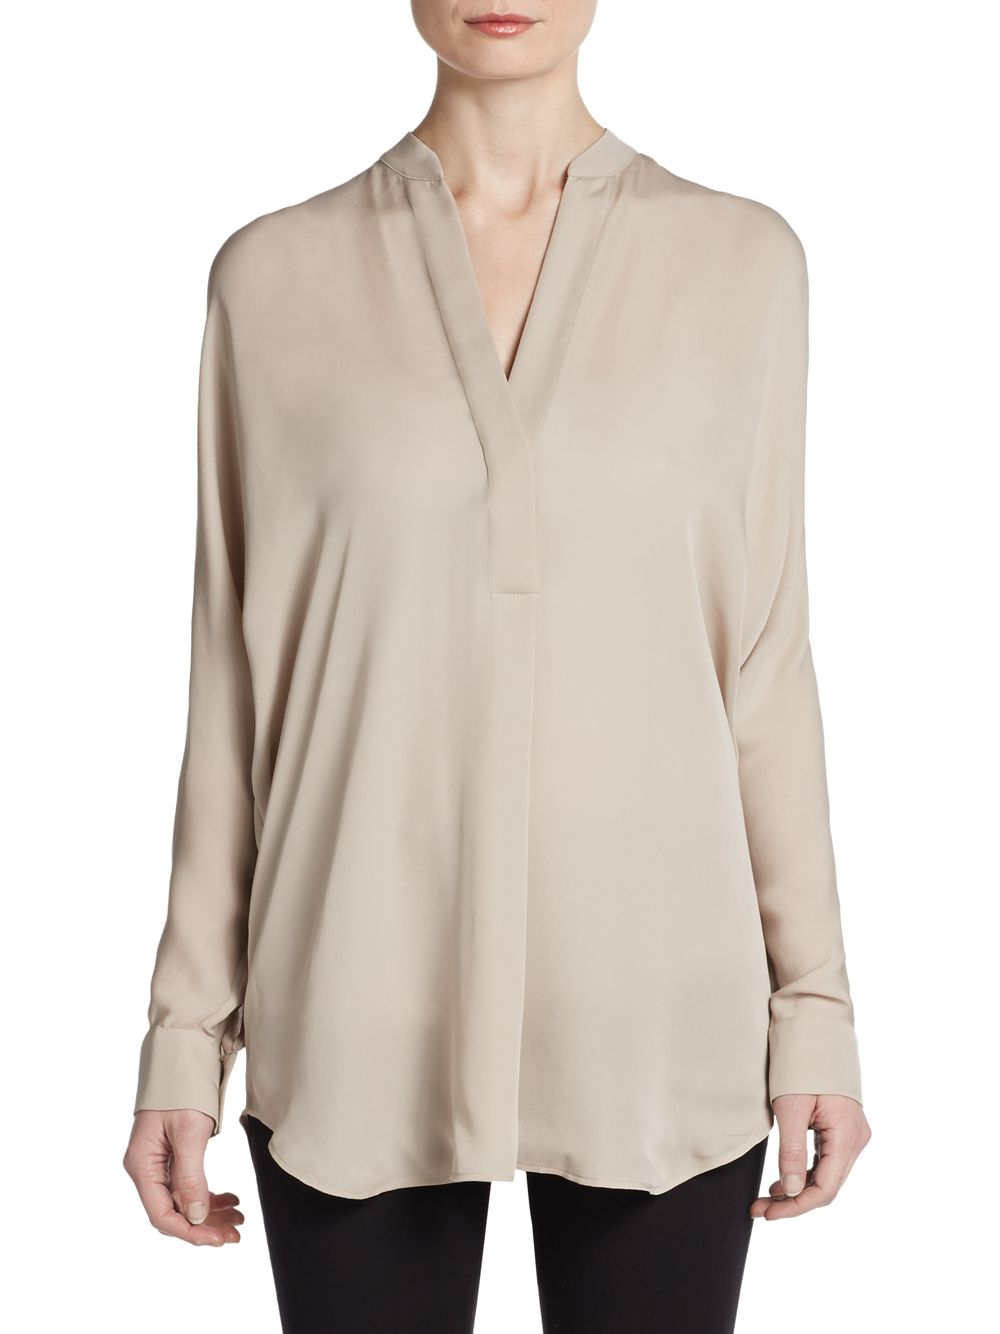 Lyst - Vince Silk Long-sleeve Blouse in Natural